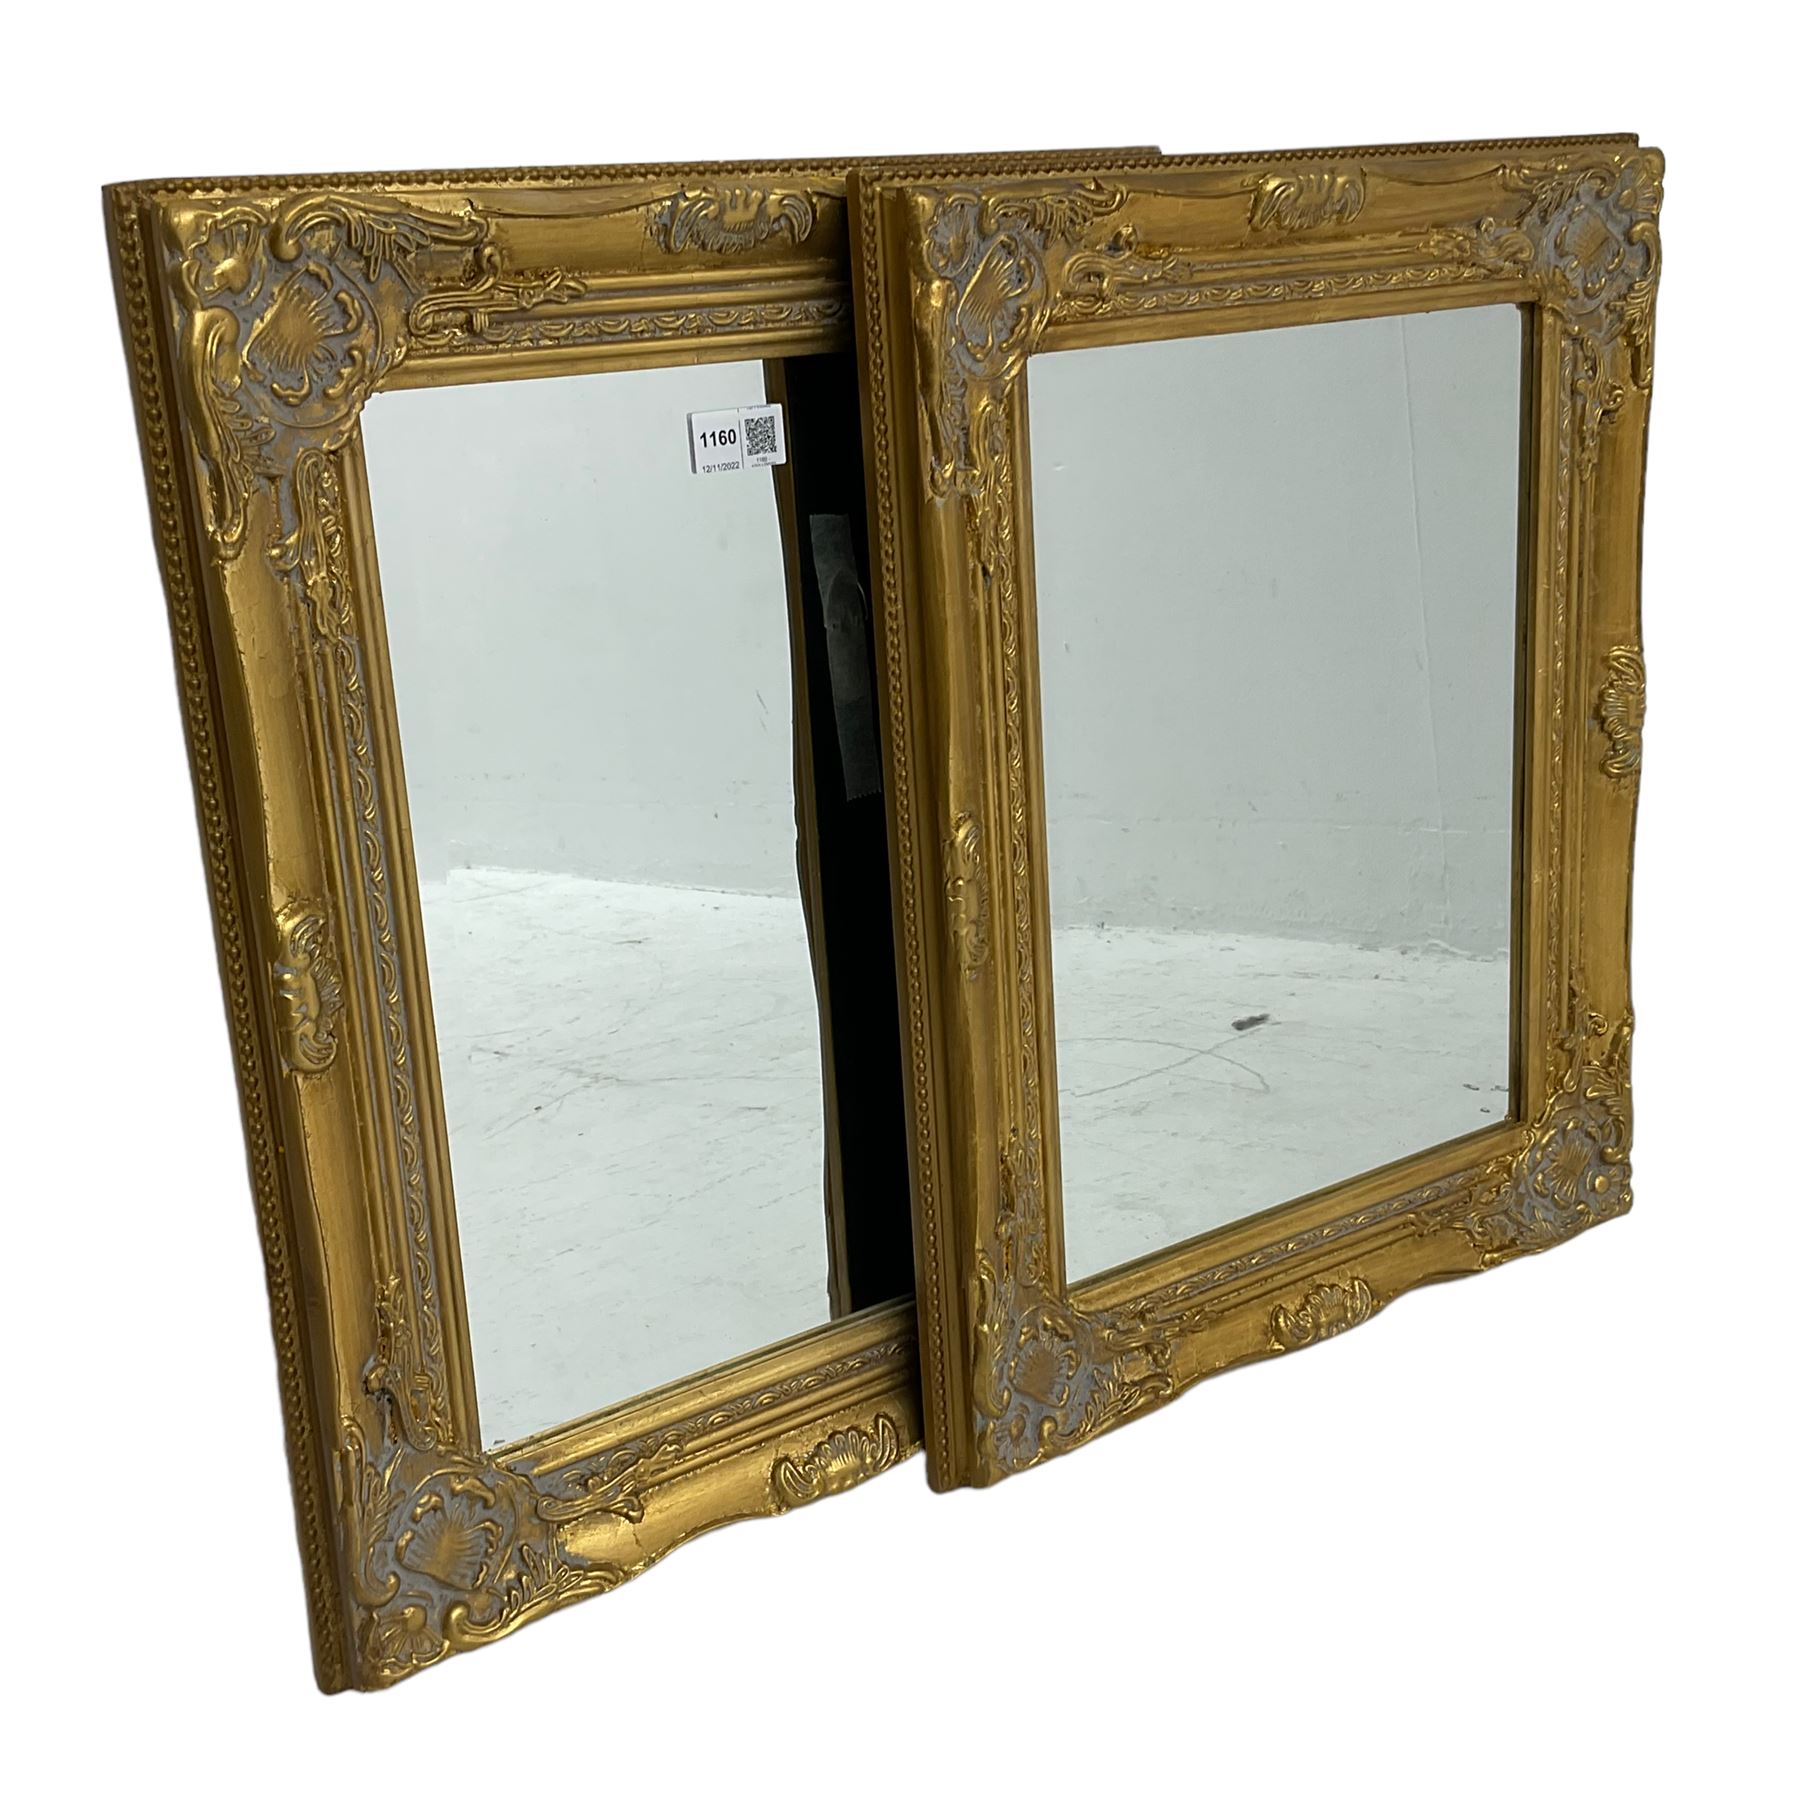 Pair bevelled edge wall mirrors in swept gilt frames decorated with ornate cartouches